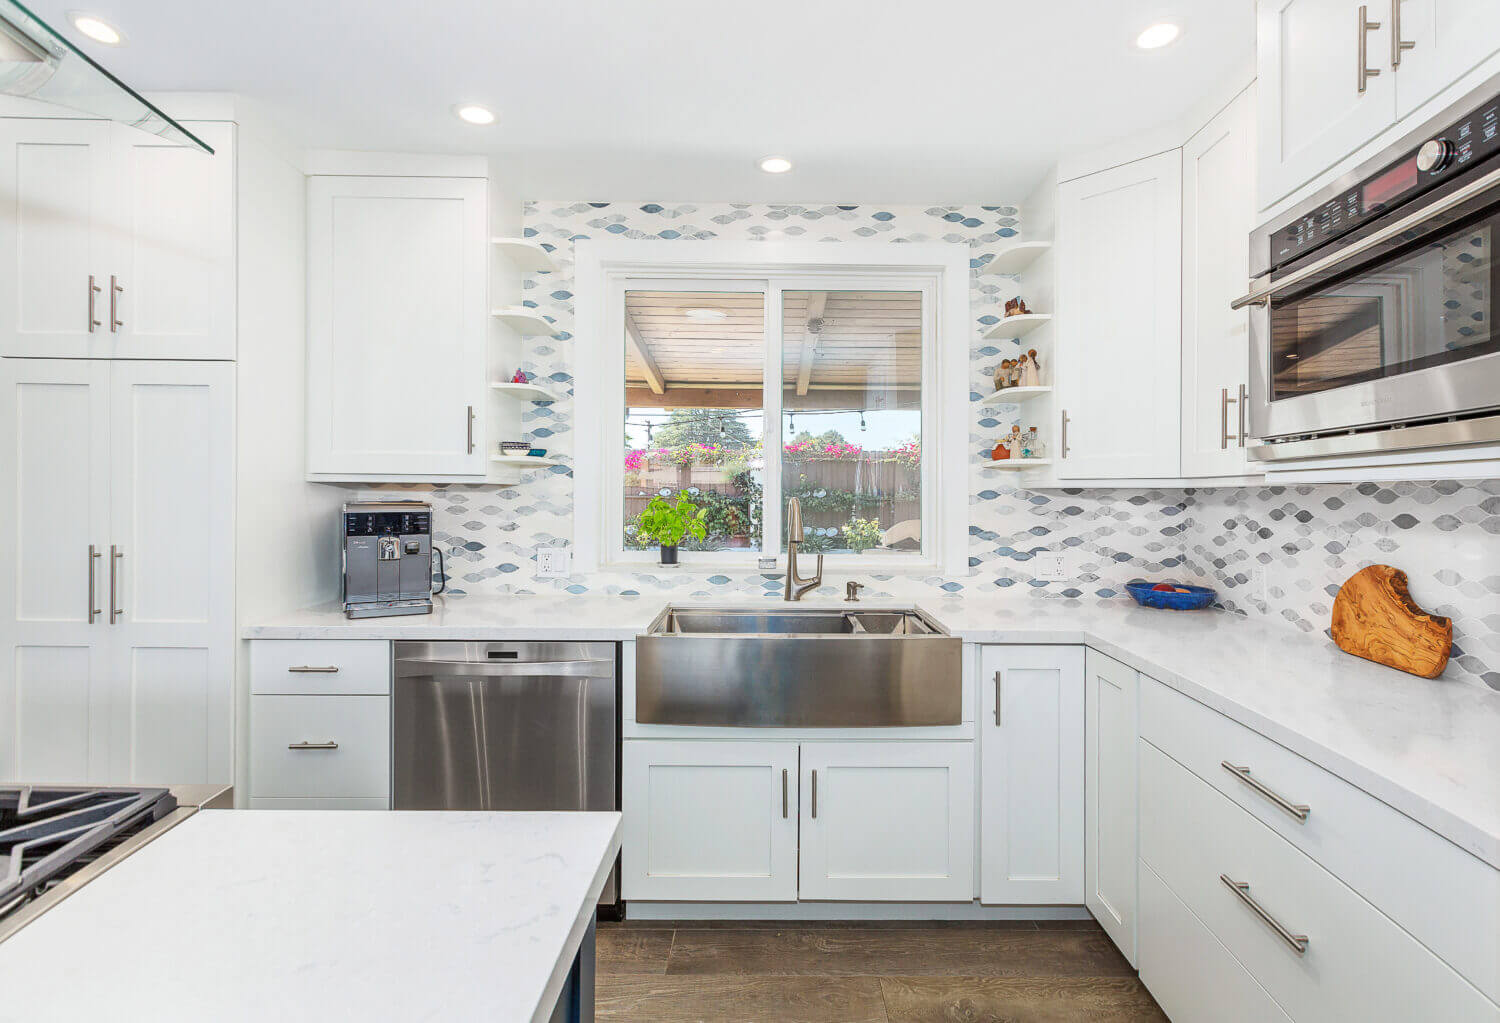 White and Blue Kitchen With a Splash of Modern - Dura Supreme Cabinetry